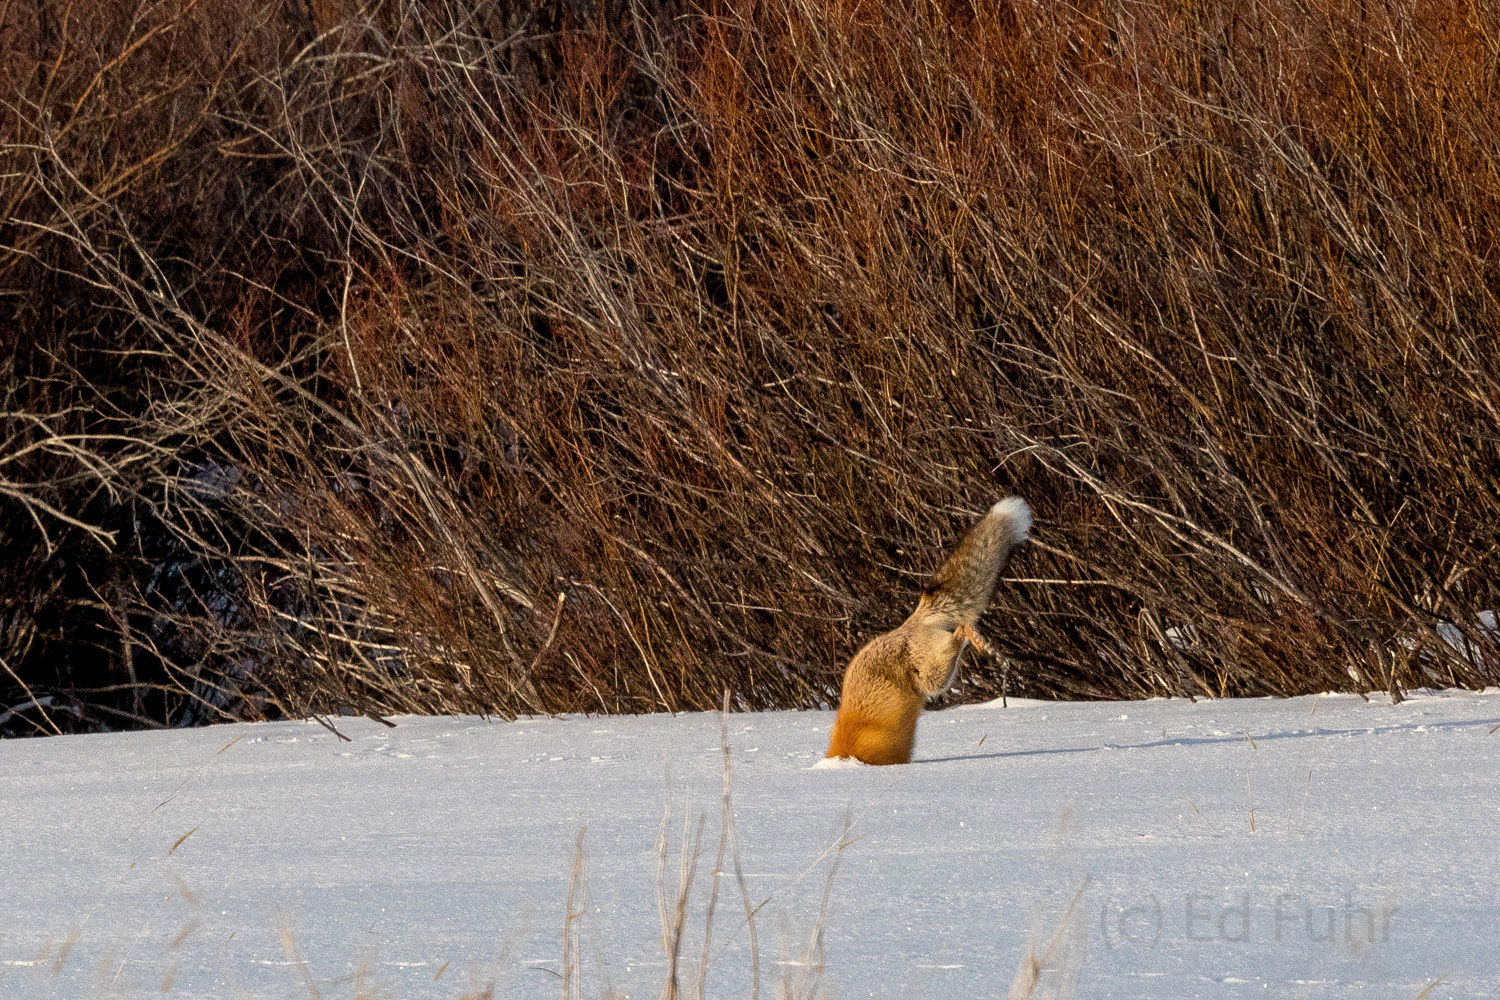 At impact the fox dives through the soft snow to catch a rodent that had moved at a most unfortunate time.  When winter's snows...